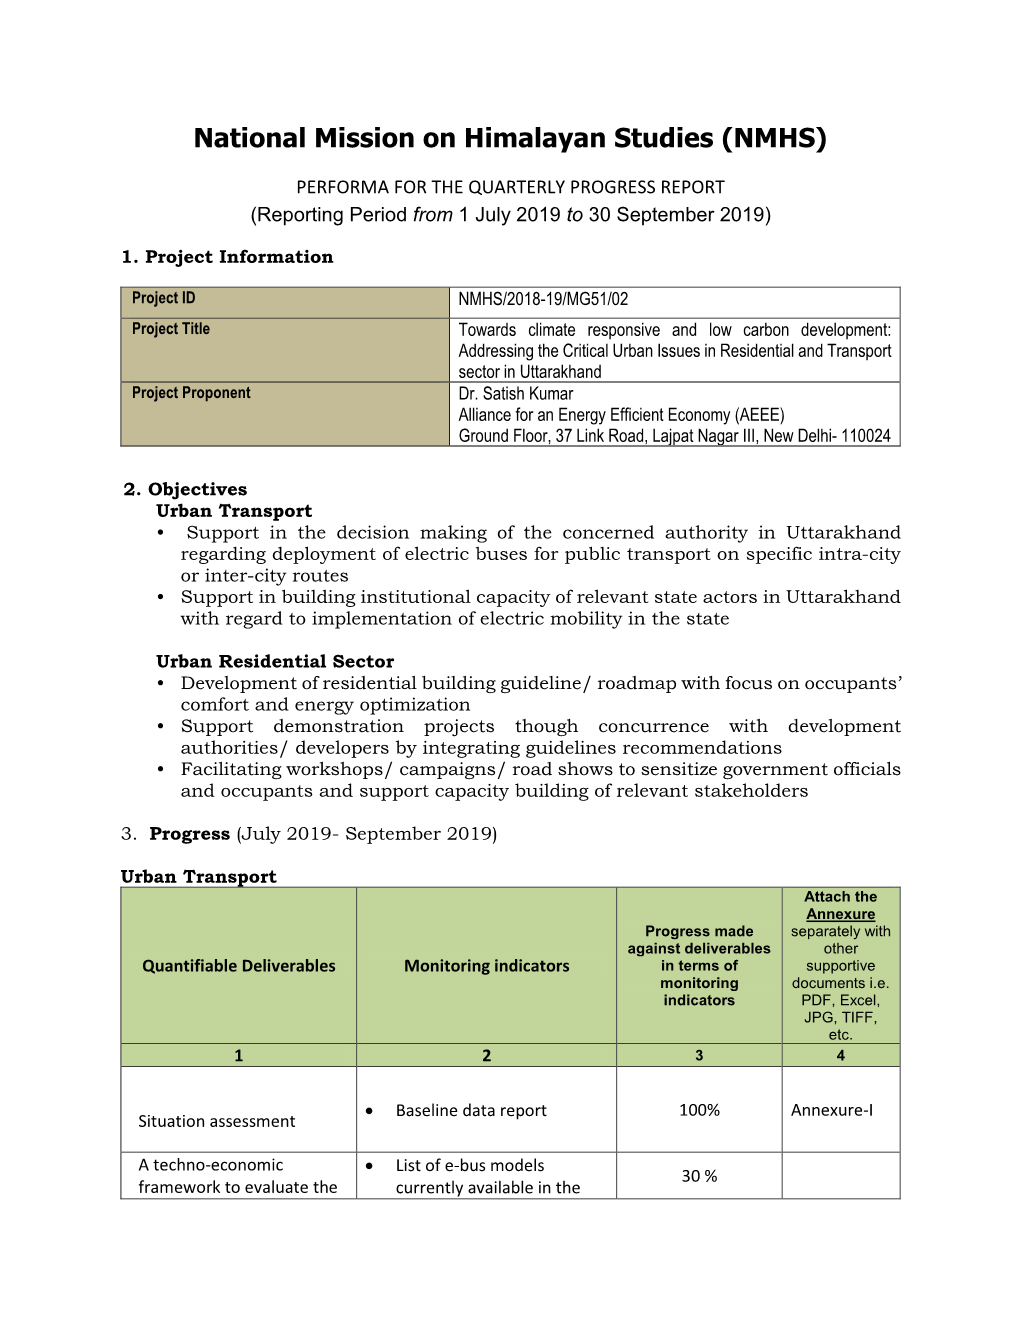 National Mission on Himalayan Studies (NMHS) PERFORMA for the QUARTERLY PROGRESS REPORT (Reporting Period from 1 July 2019 to 30 September 2019)